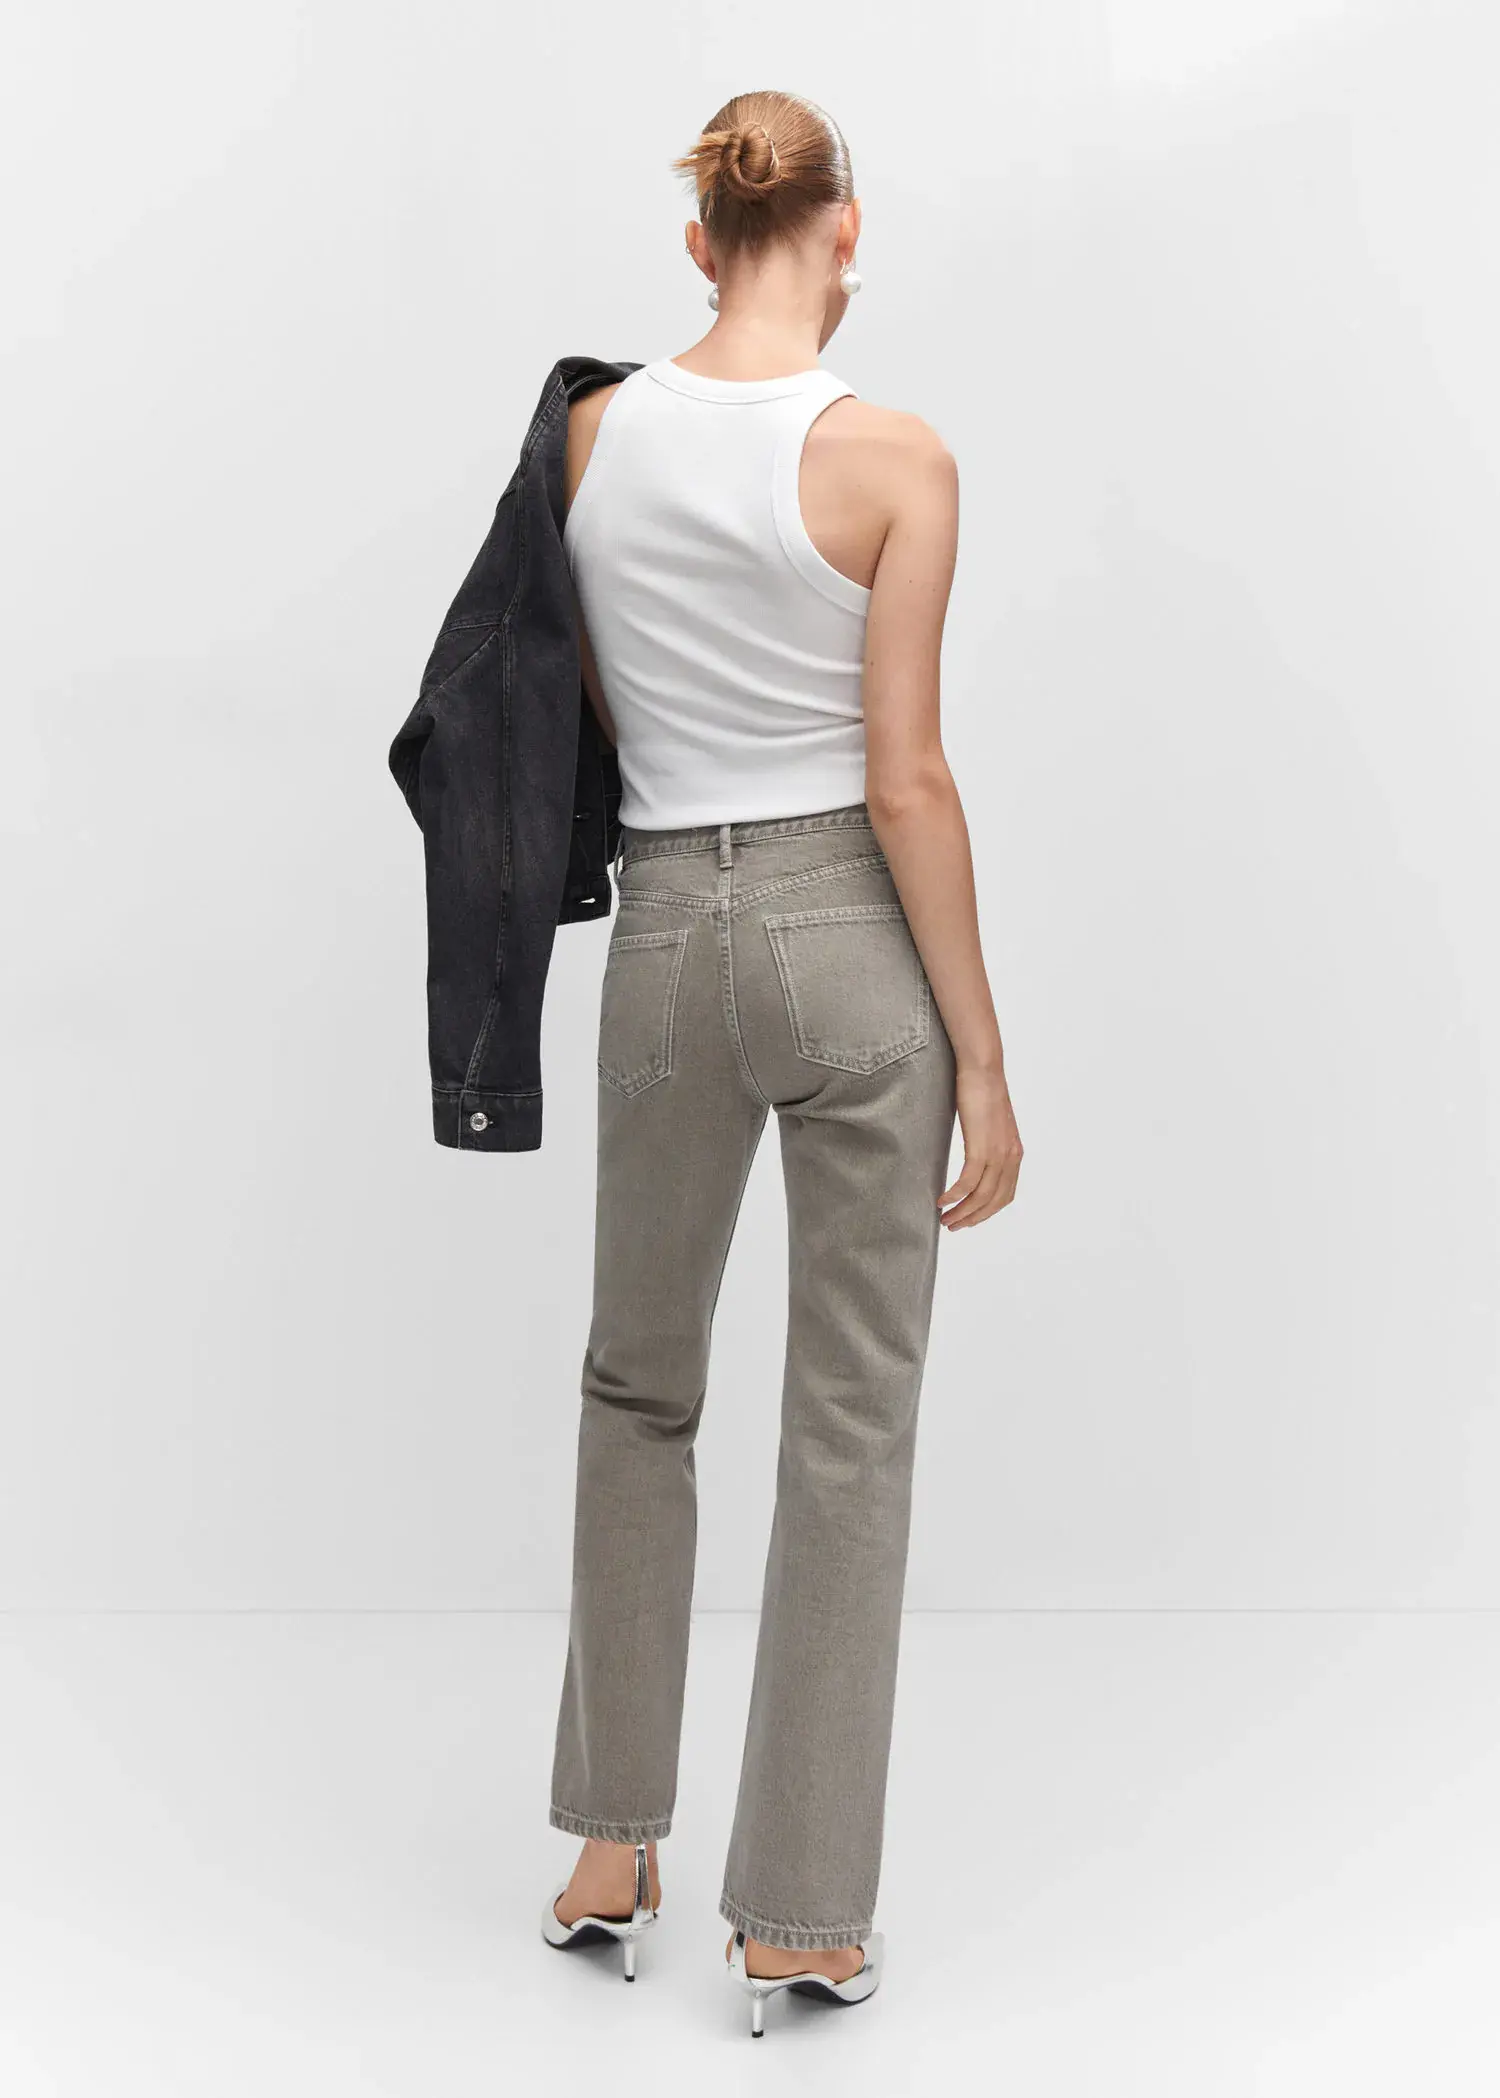 Mango Ribbed cotton-blend top. a woman in a white shirt and gray pants holding a jacket. 